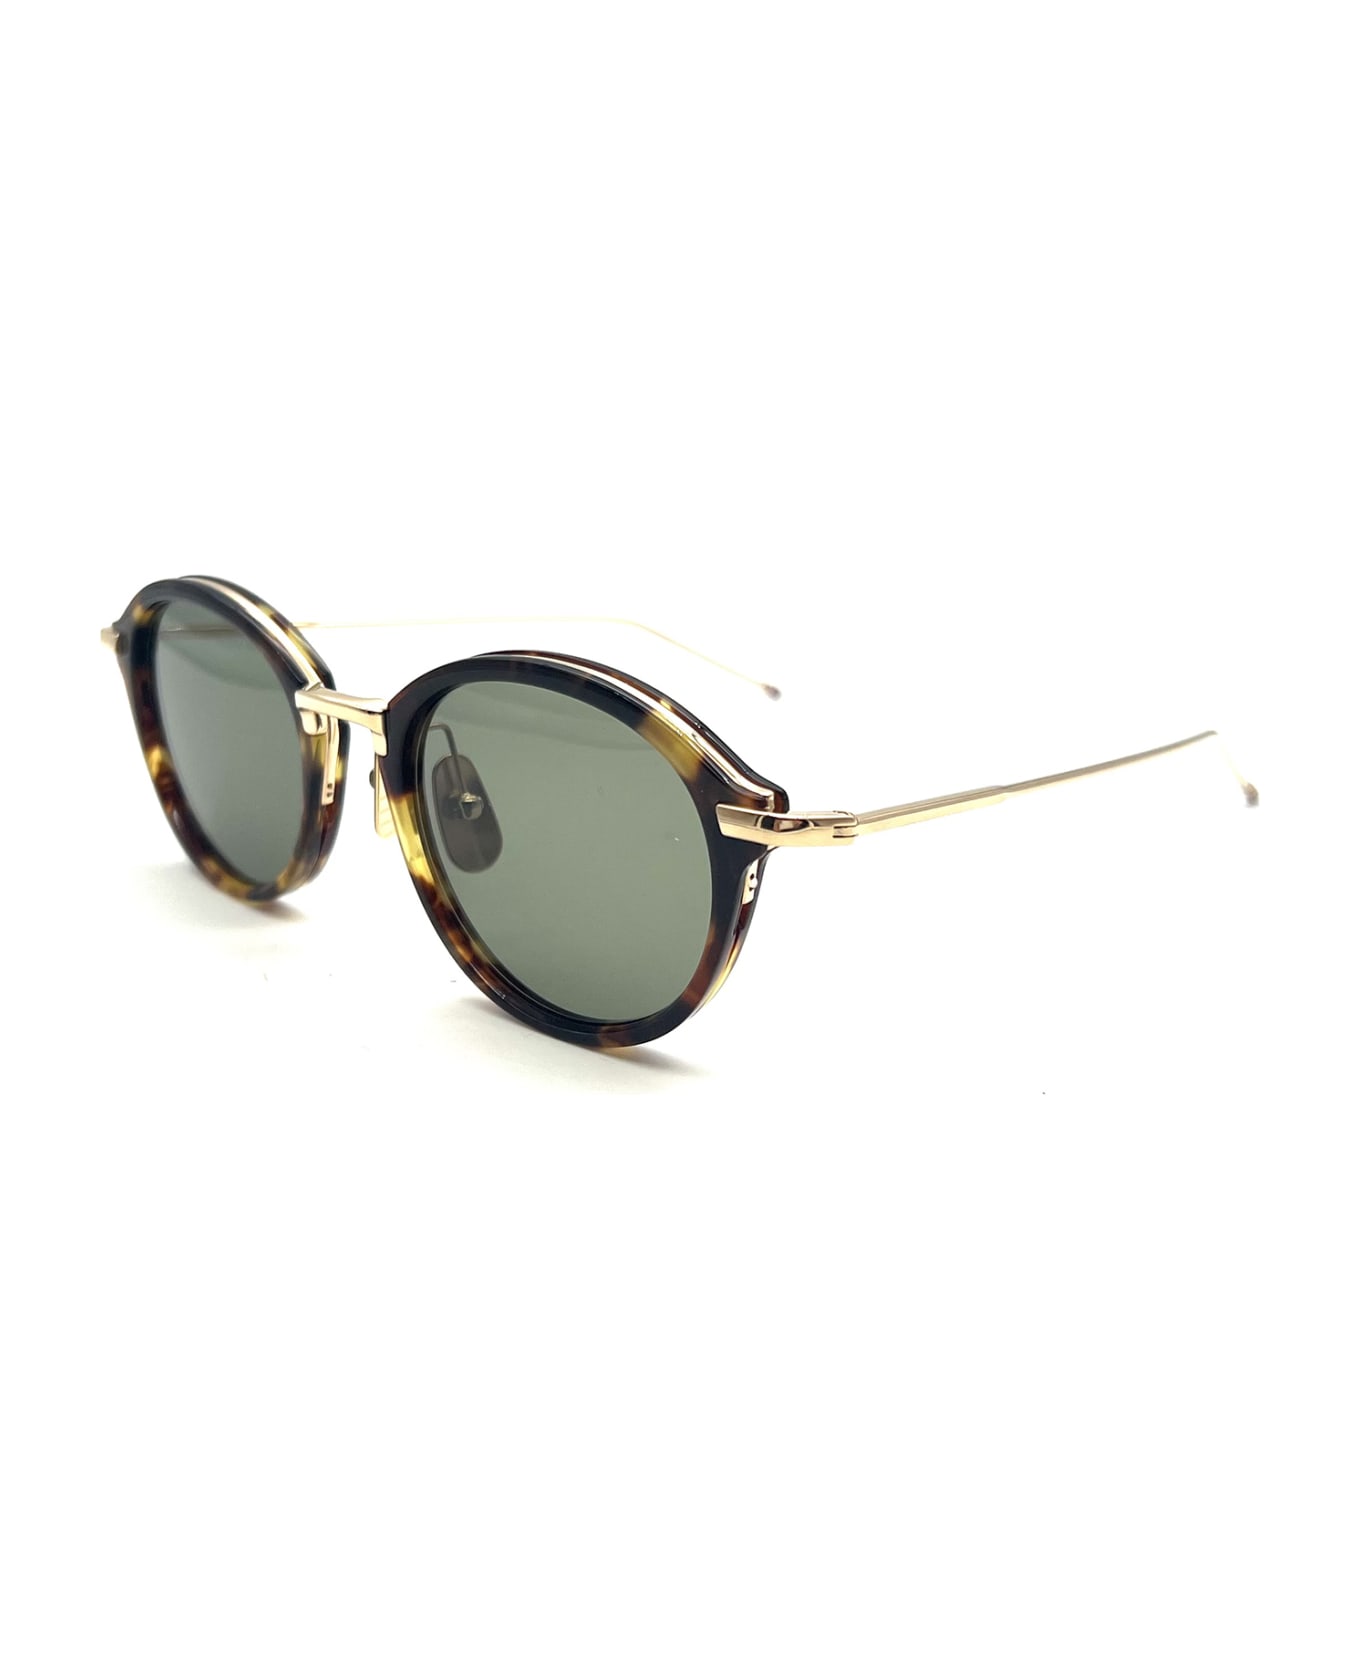 Thom Browne UES011A/G0003 Sunglasses - Med Brown サングラス